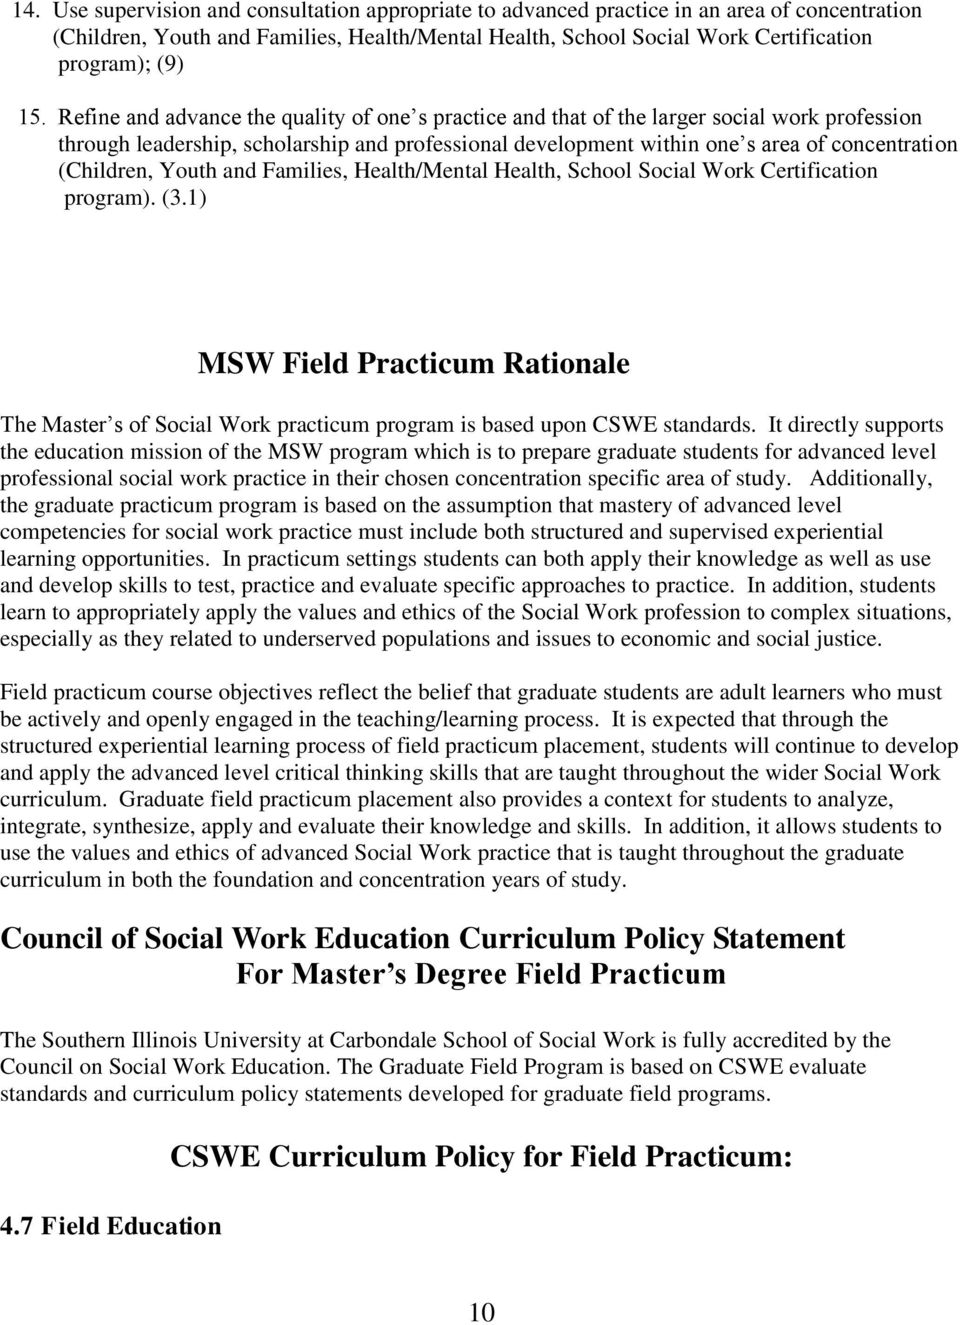 (Children, Youth and Families, Health/Mental Health, School Social Work Certification program). (3.